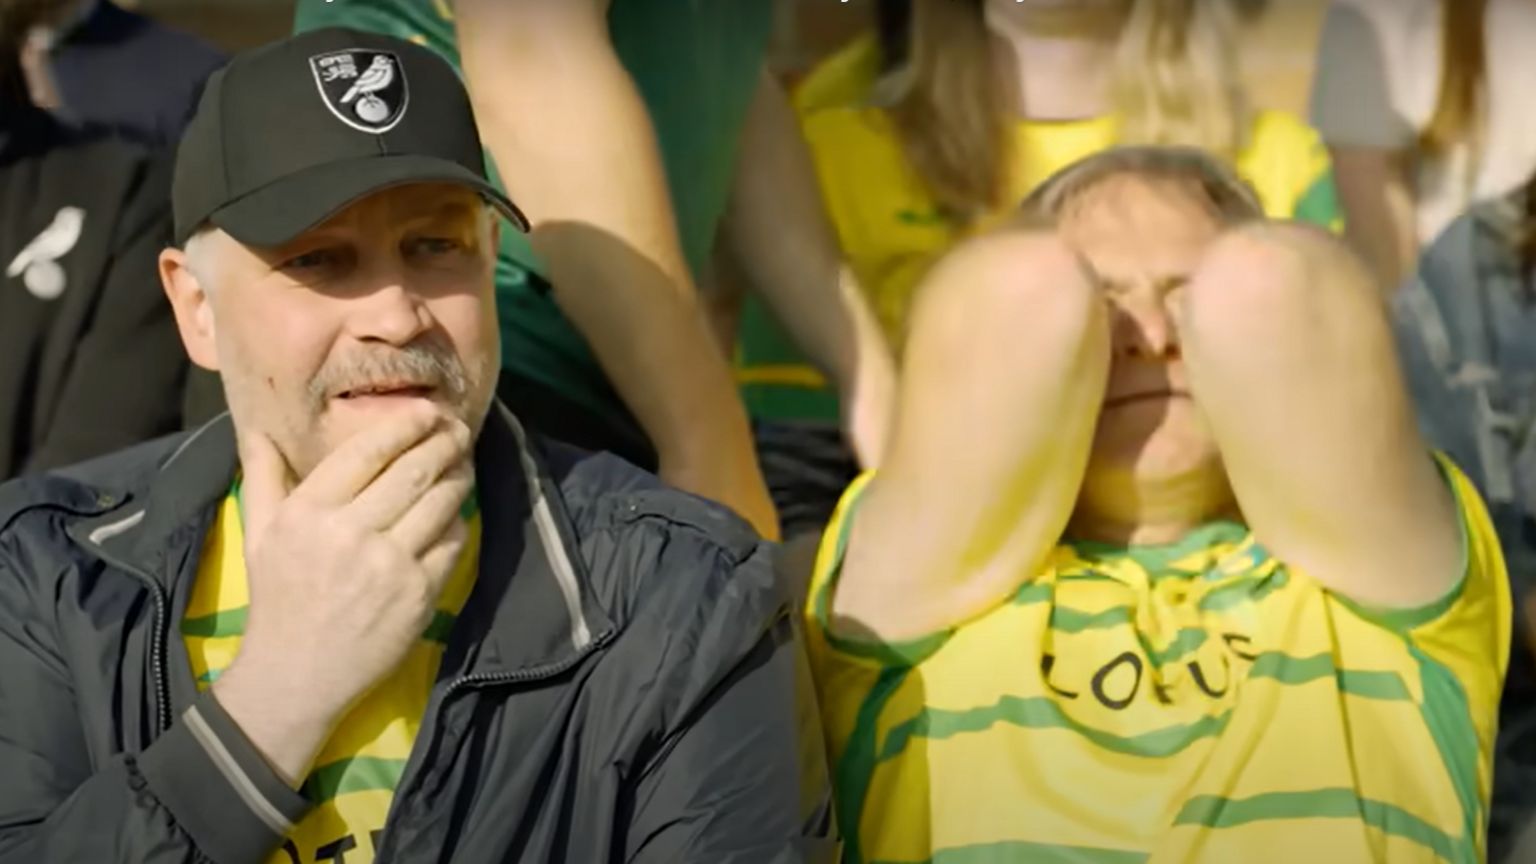 Moving Norwich City mental health video hailed by UEFA - BBC News